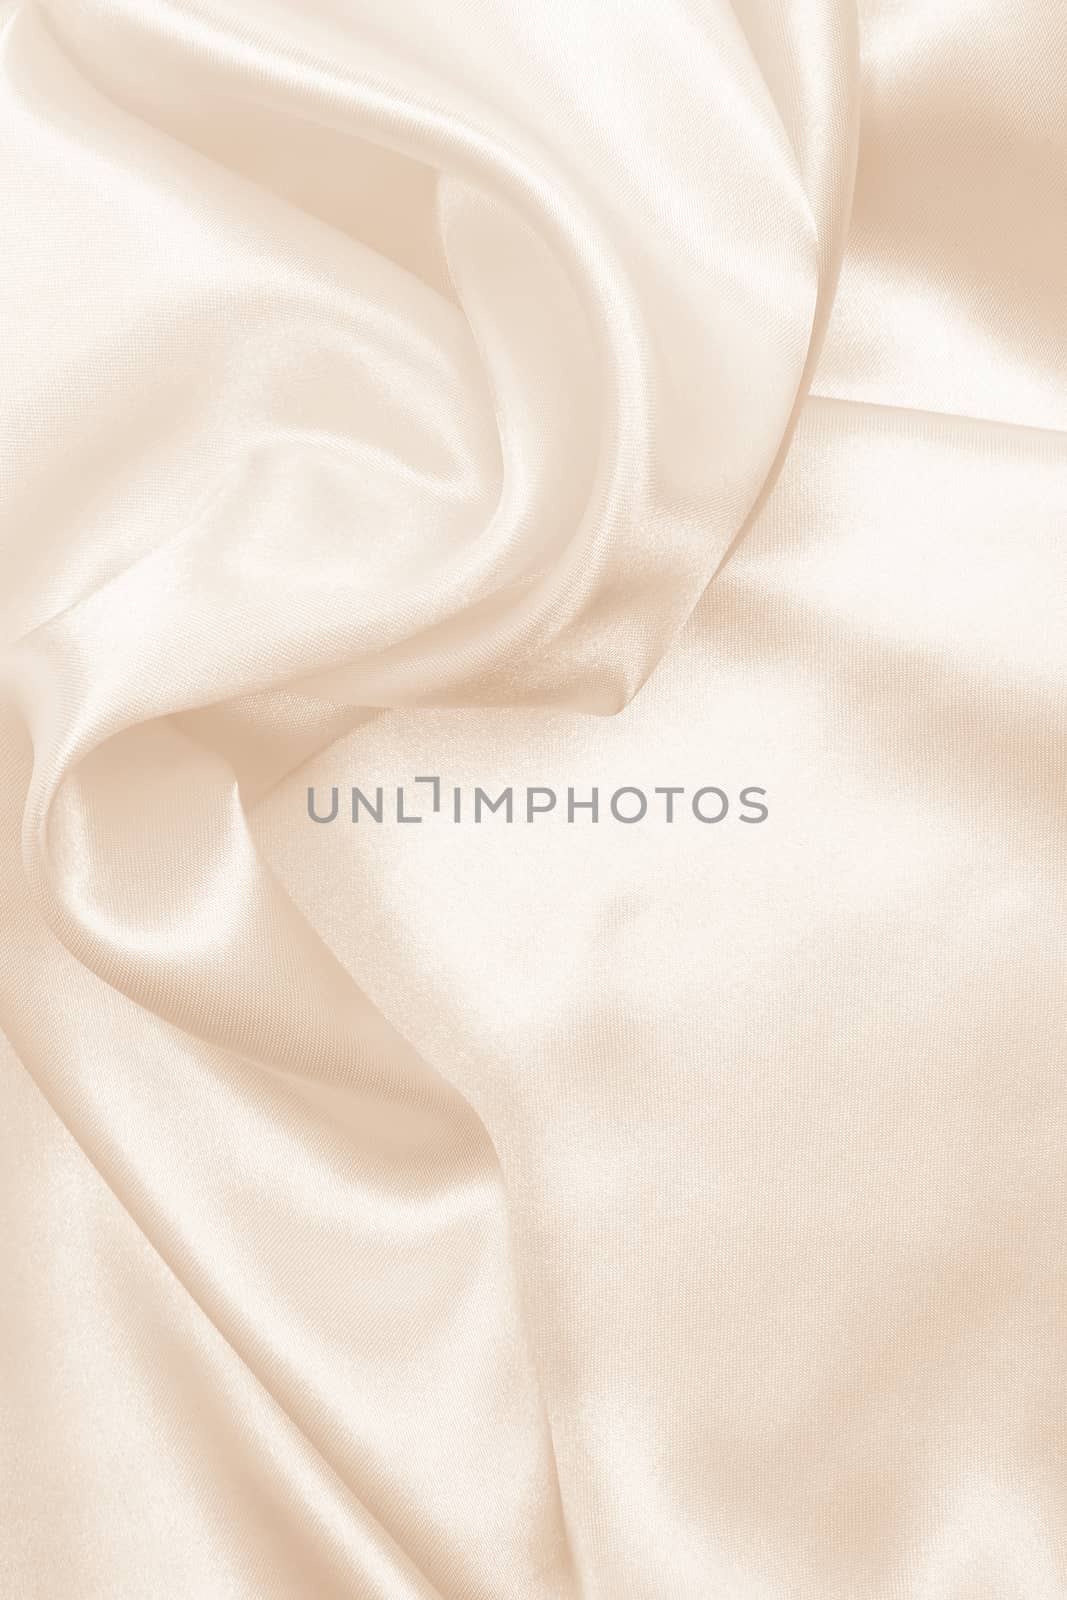 Smooth elegant golden silk can use as wedding background. In Sepia toned. Retro style